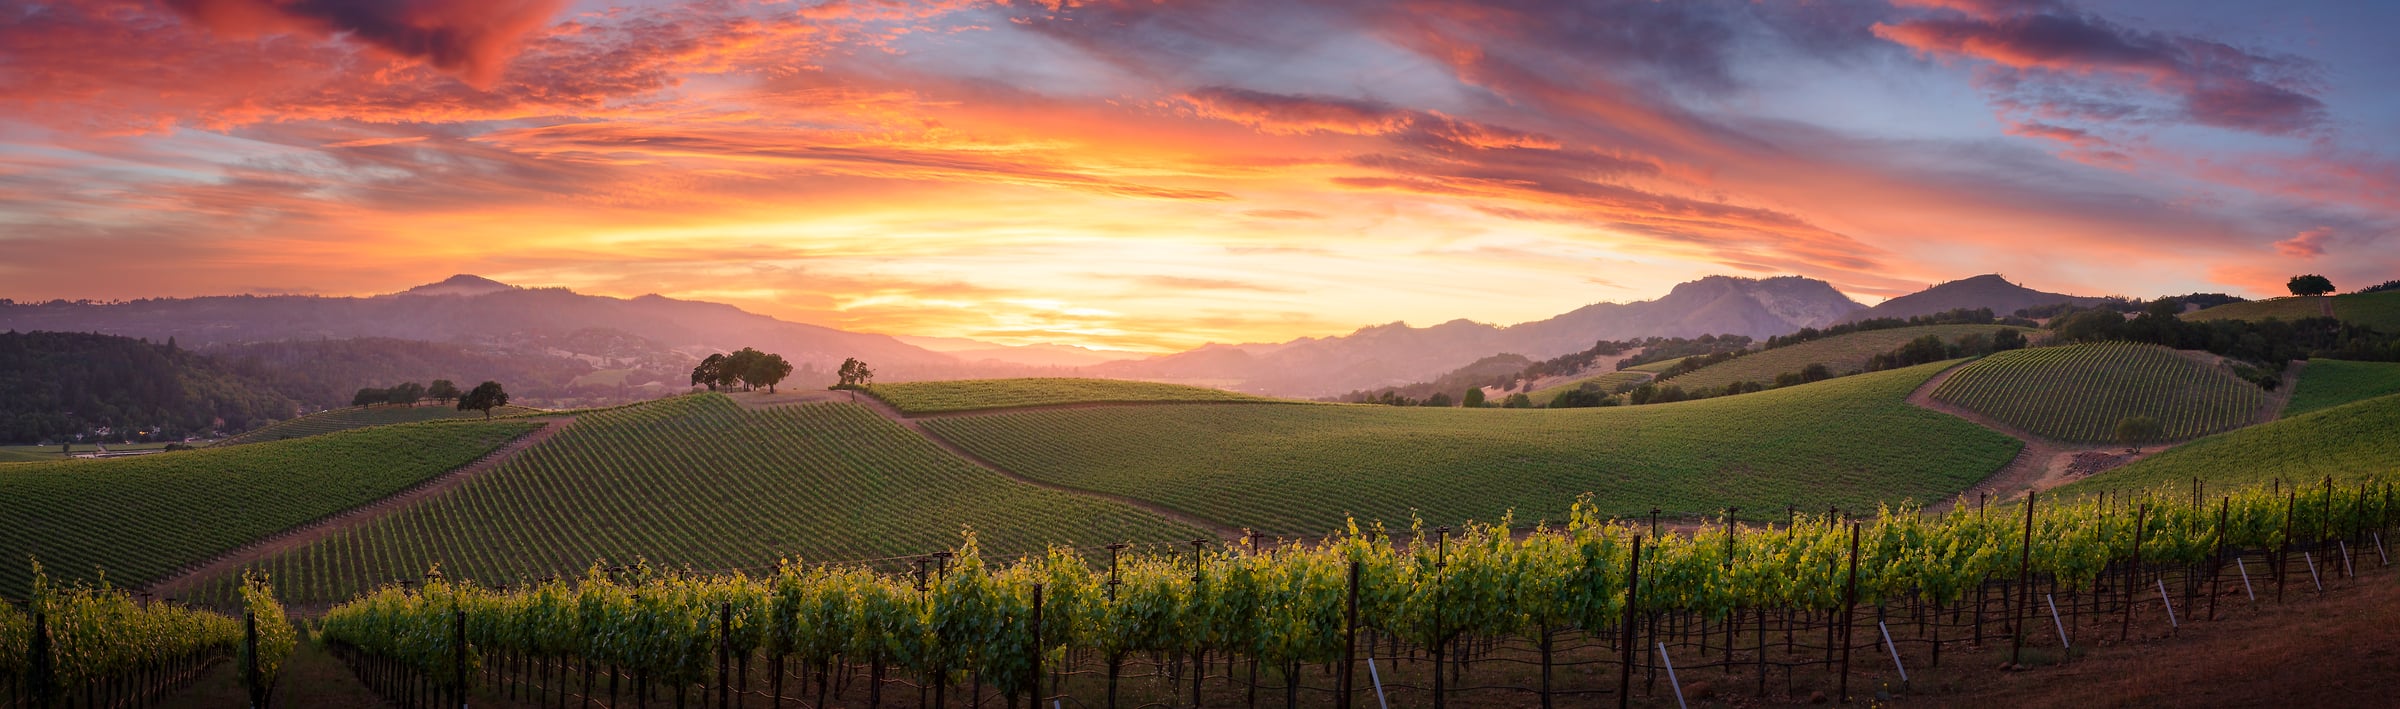 159 megapixels! A very high resolution, large-format VAST photo print of a beautiful vineyard at sunset; landscape photograph created by Jeff Lewis in Sonoma, California.